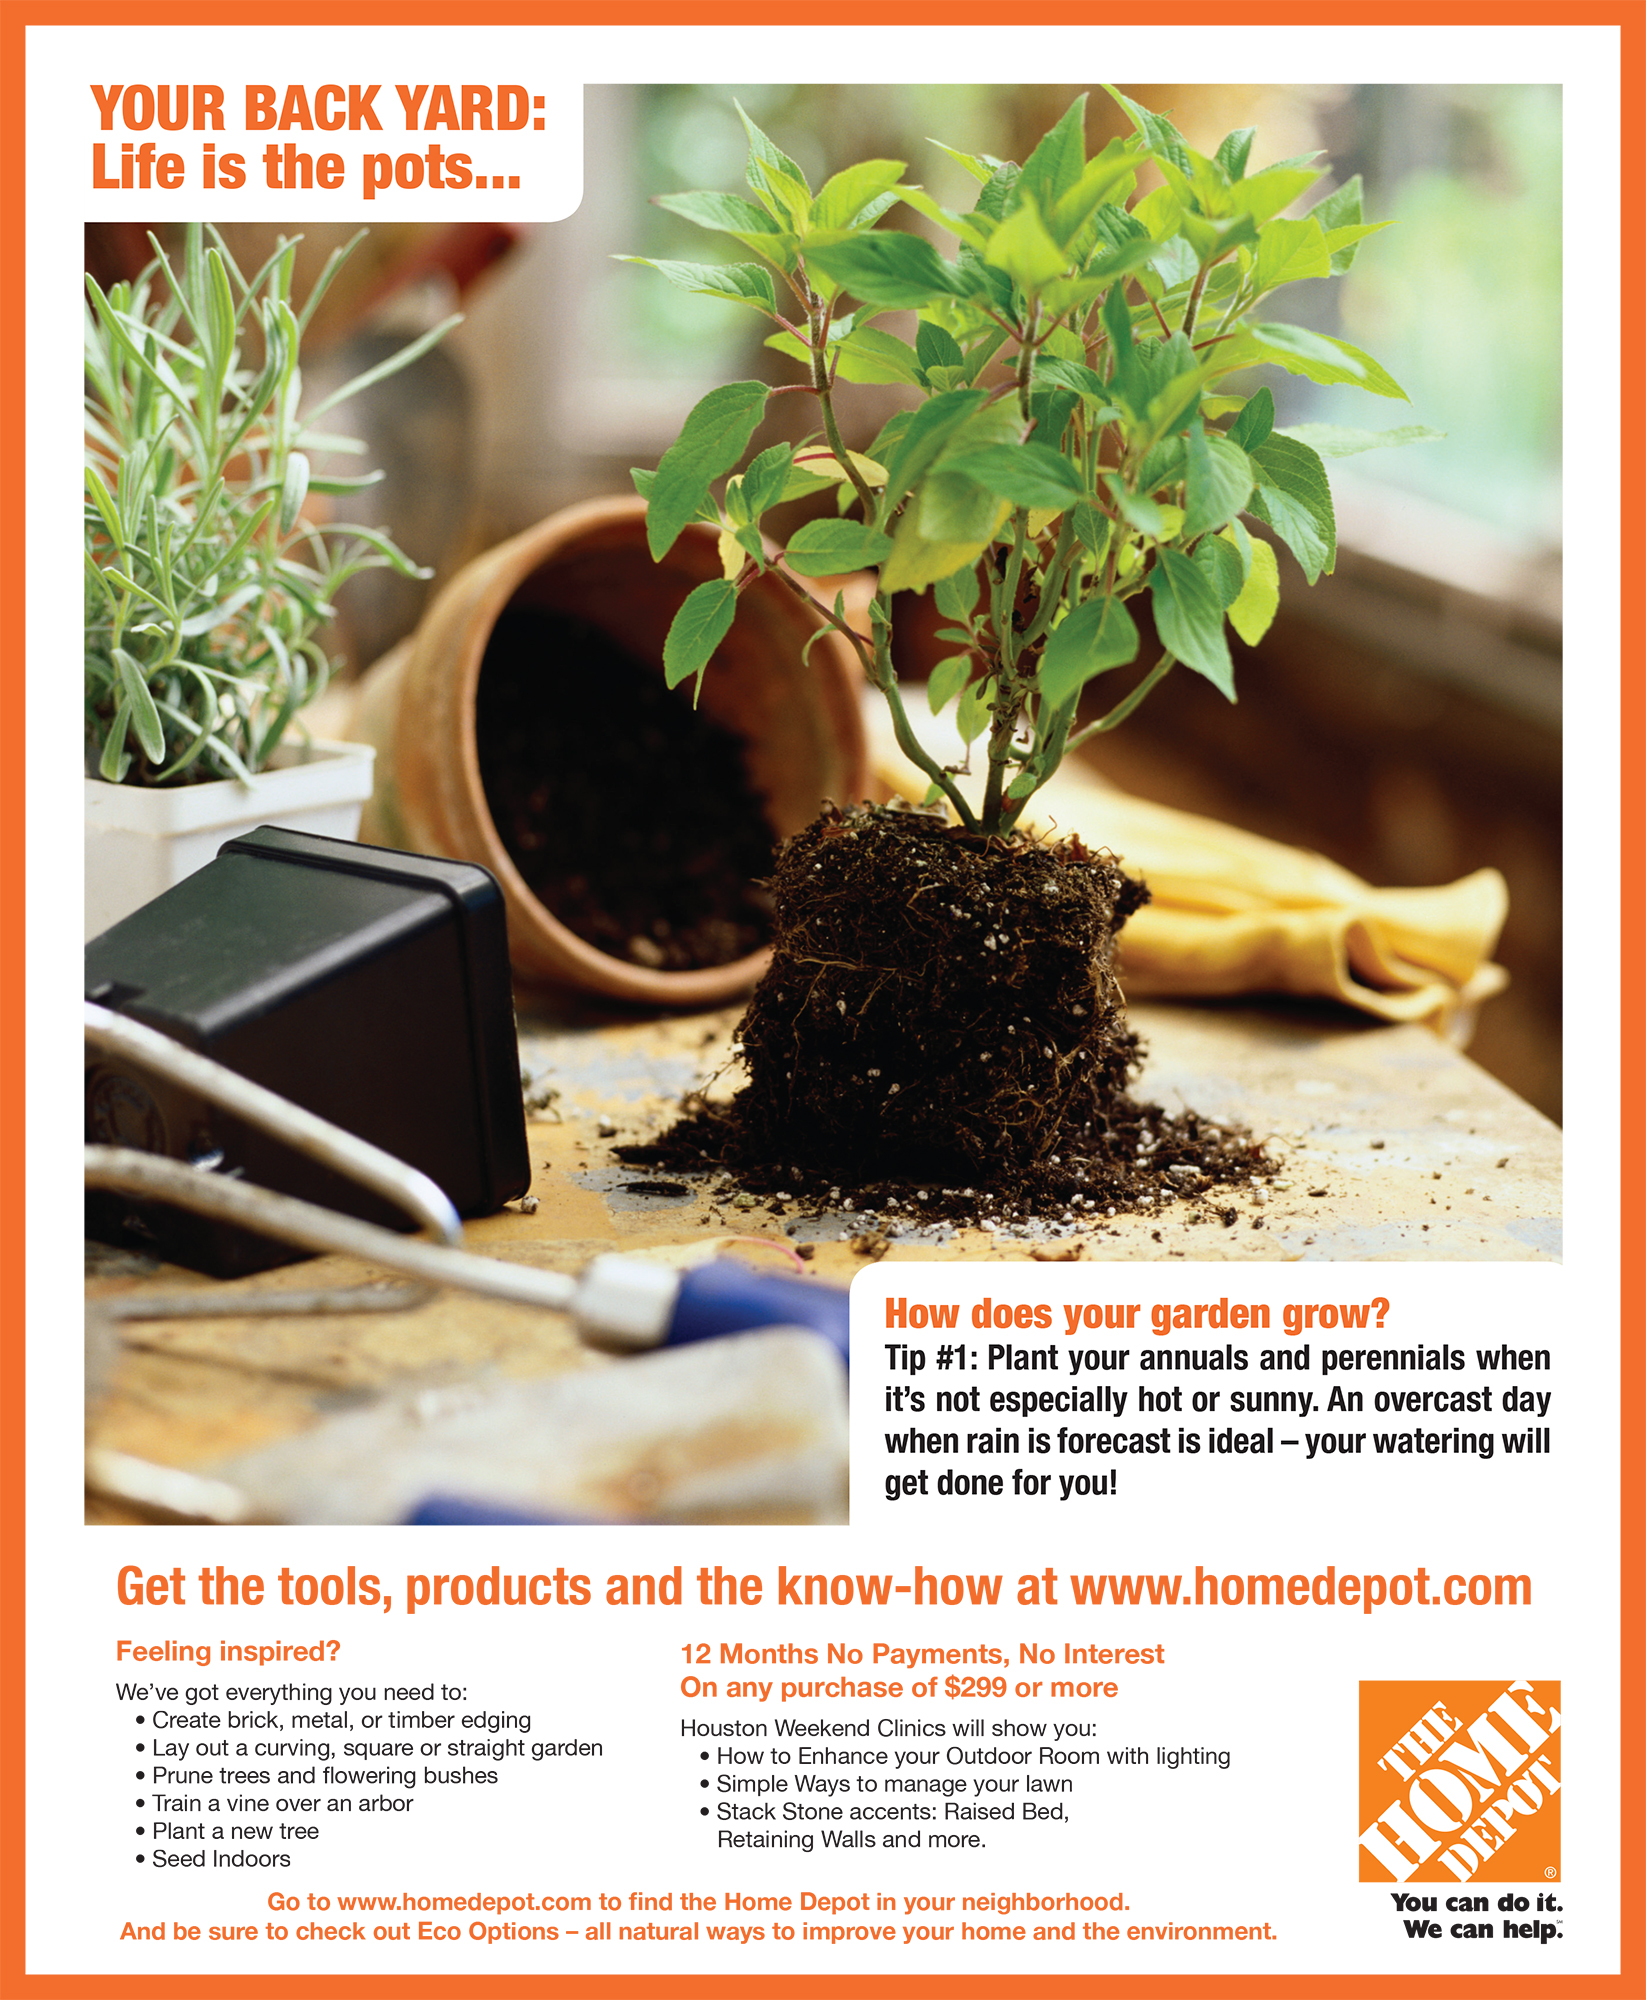 Newspaper Ad - Home Depot: Life Is The Pots